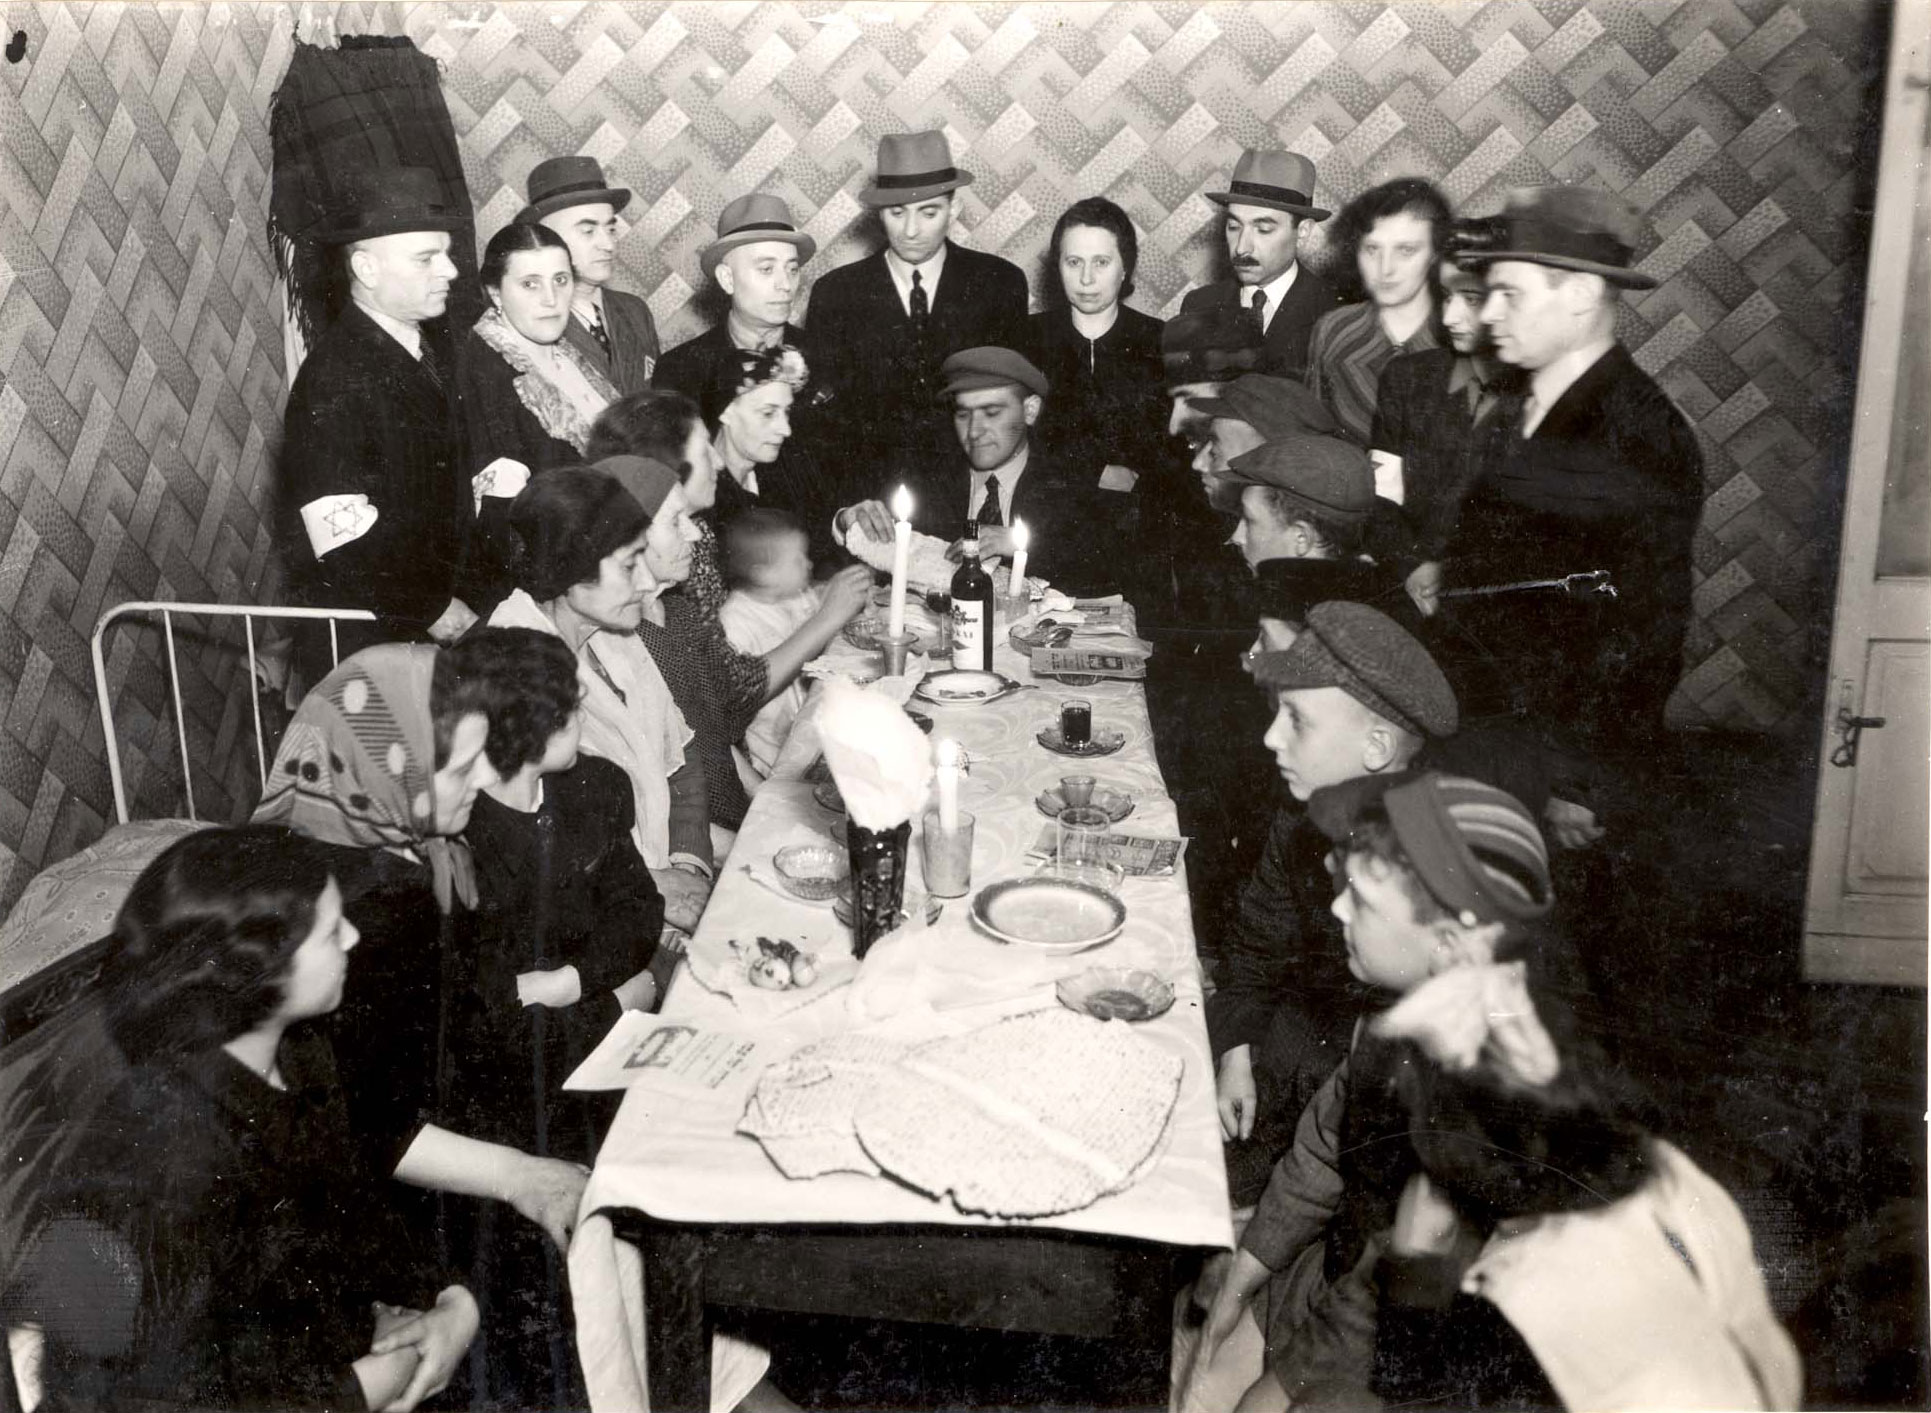 A Passover Seder in the Warsaw Ghetto, Poland